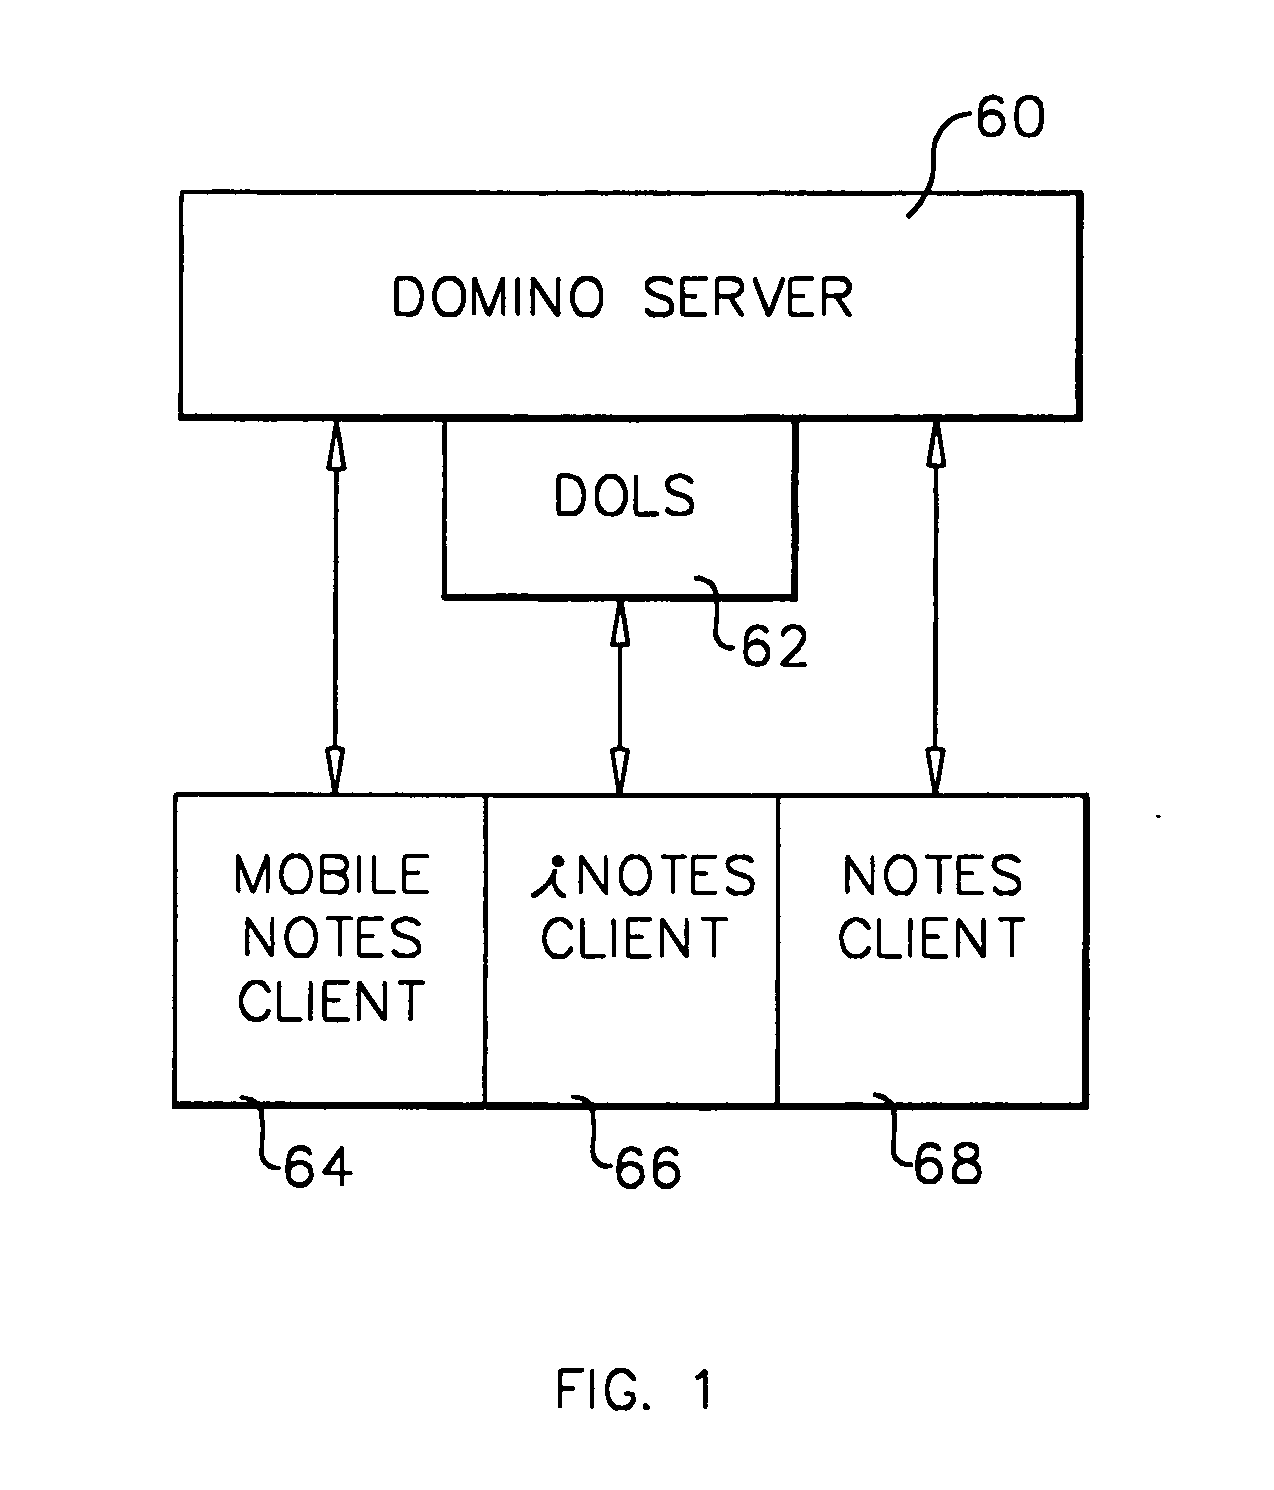 System and method for developing and administering web applications and services from a workflow, enterprise, and mail-enabled web application server and platform